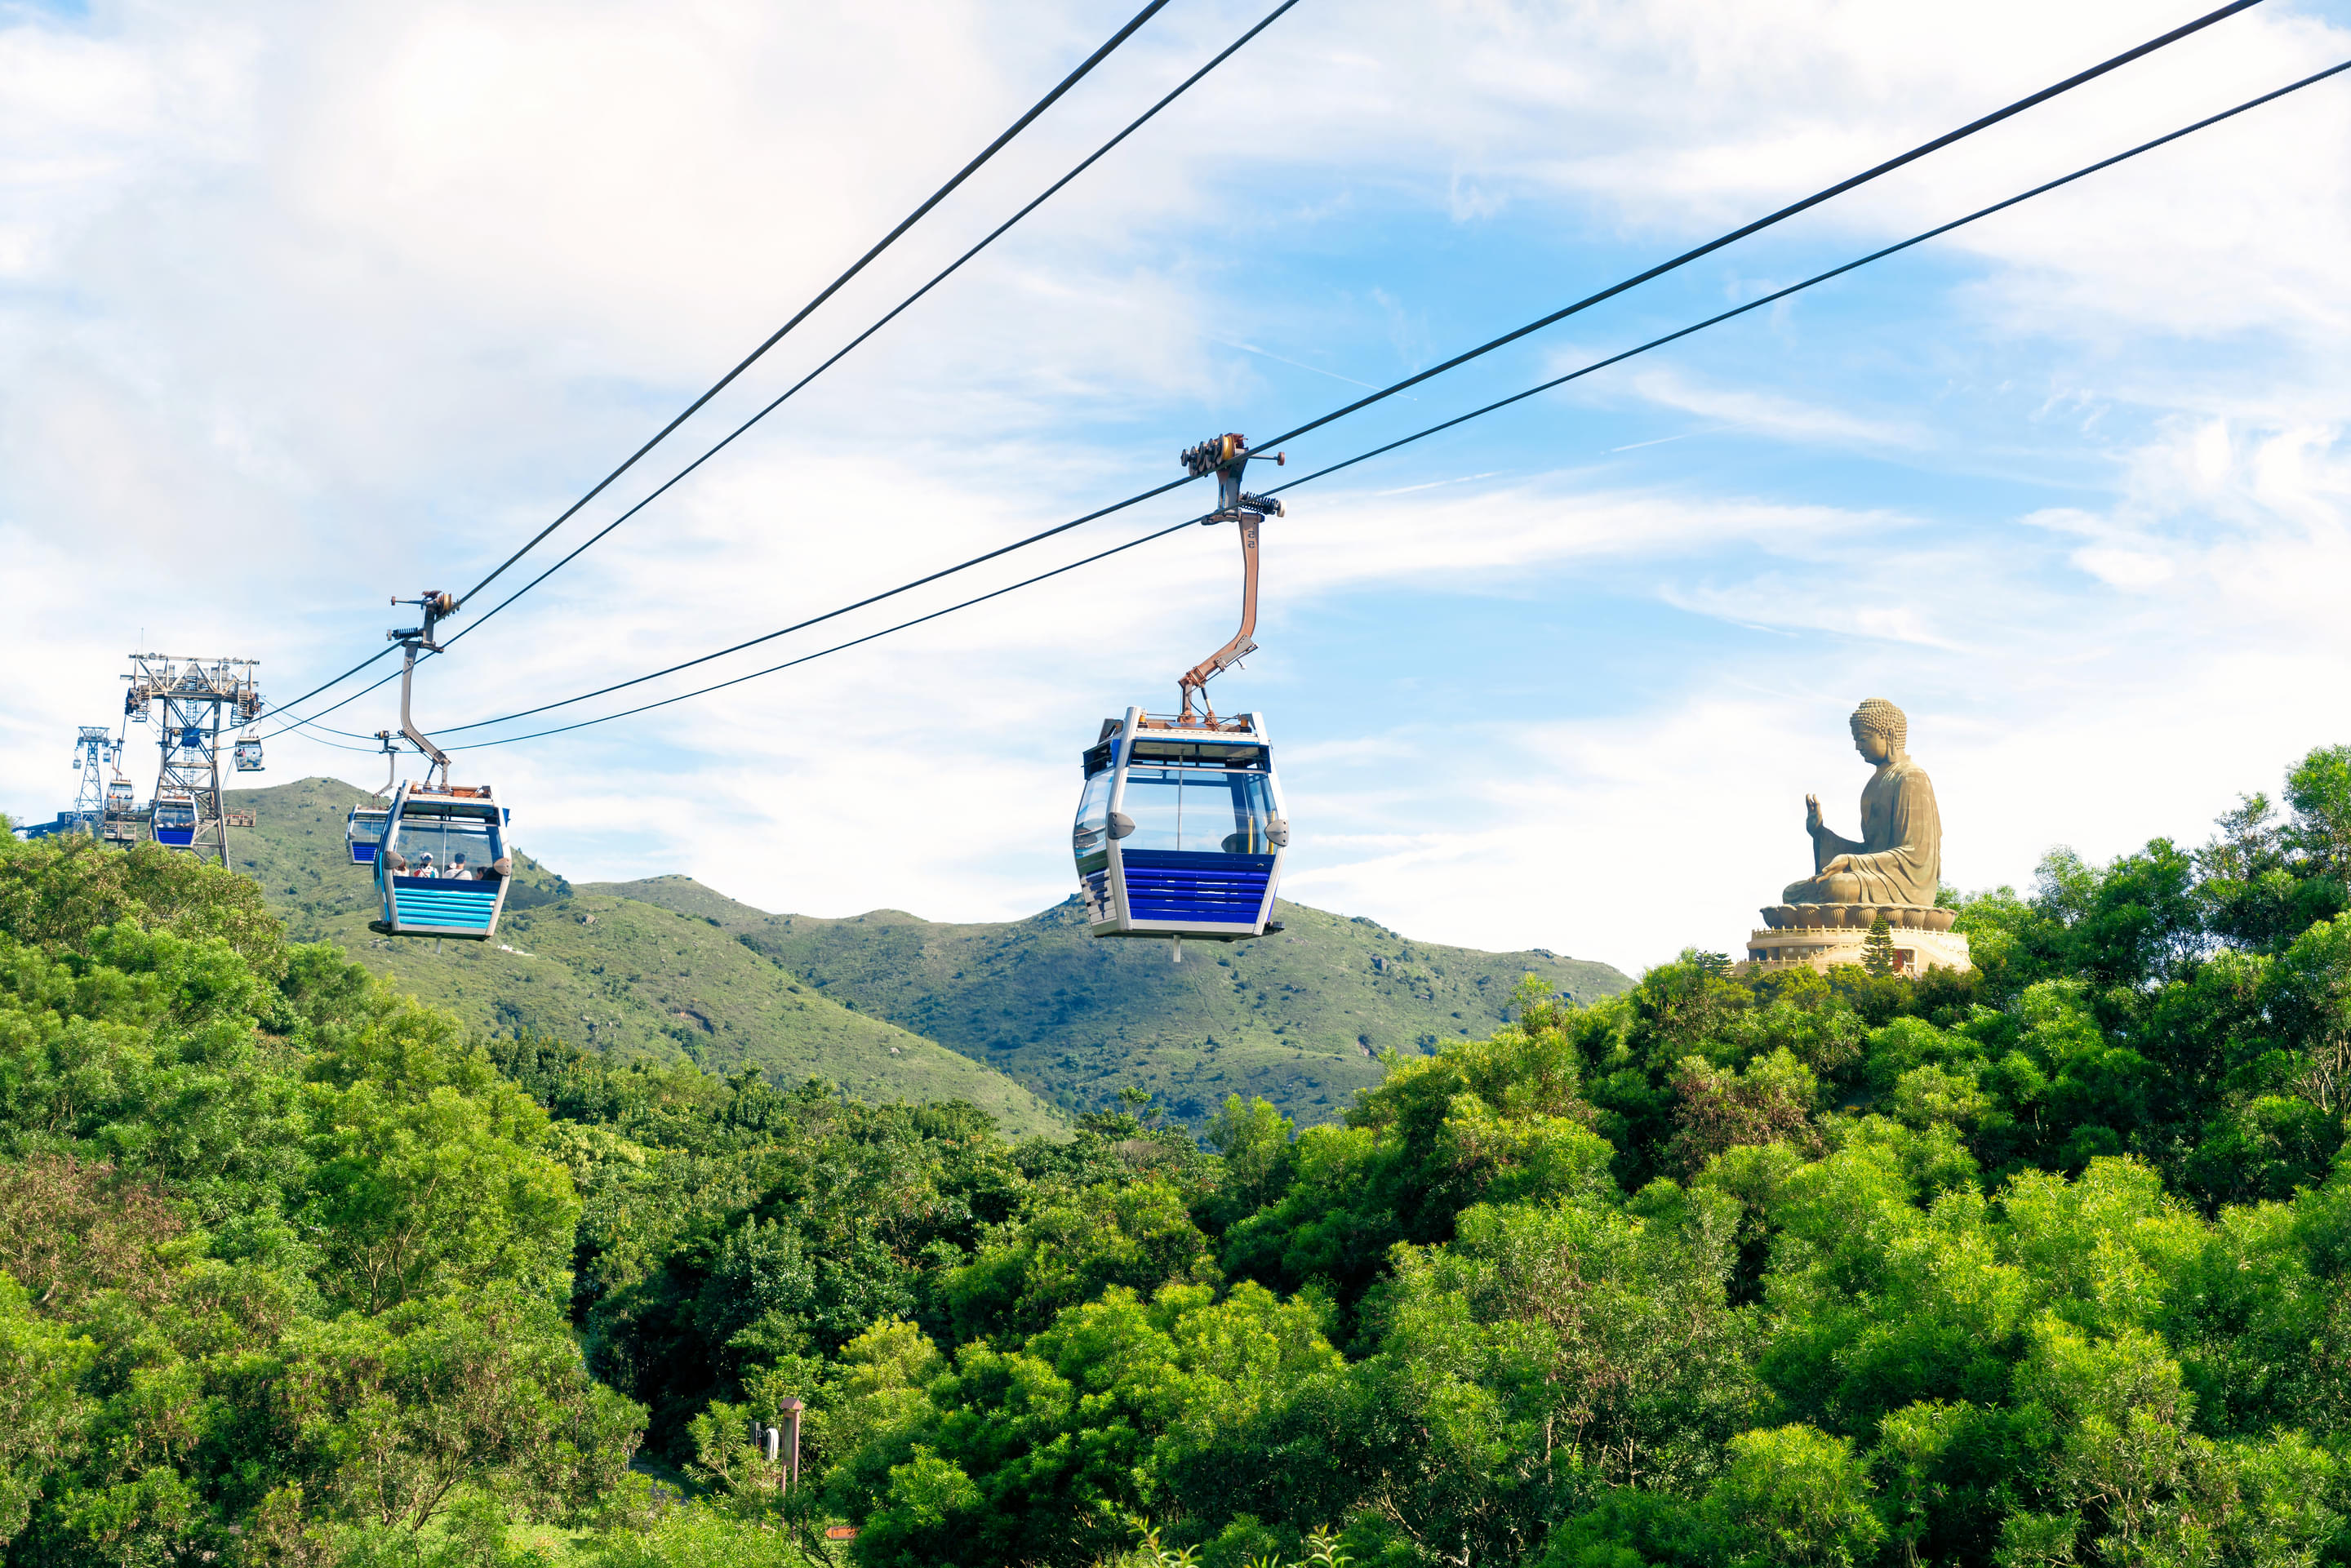 Ngong Ping 360 Overview